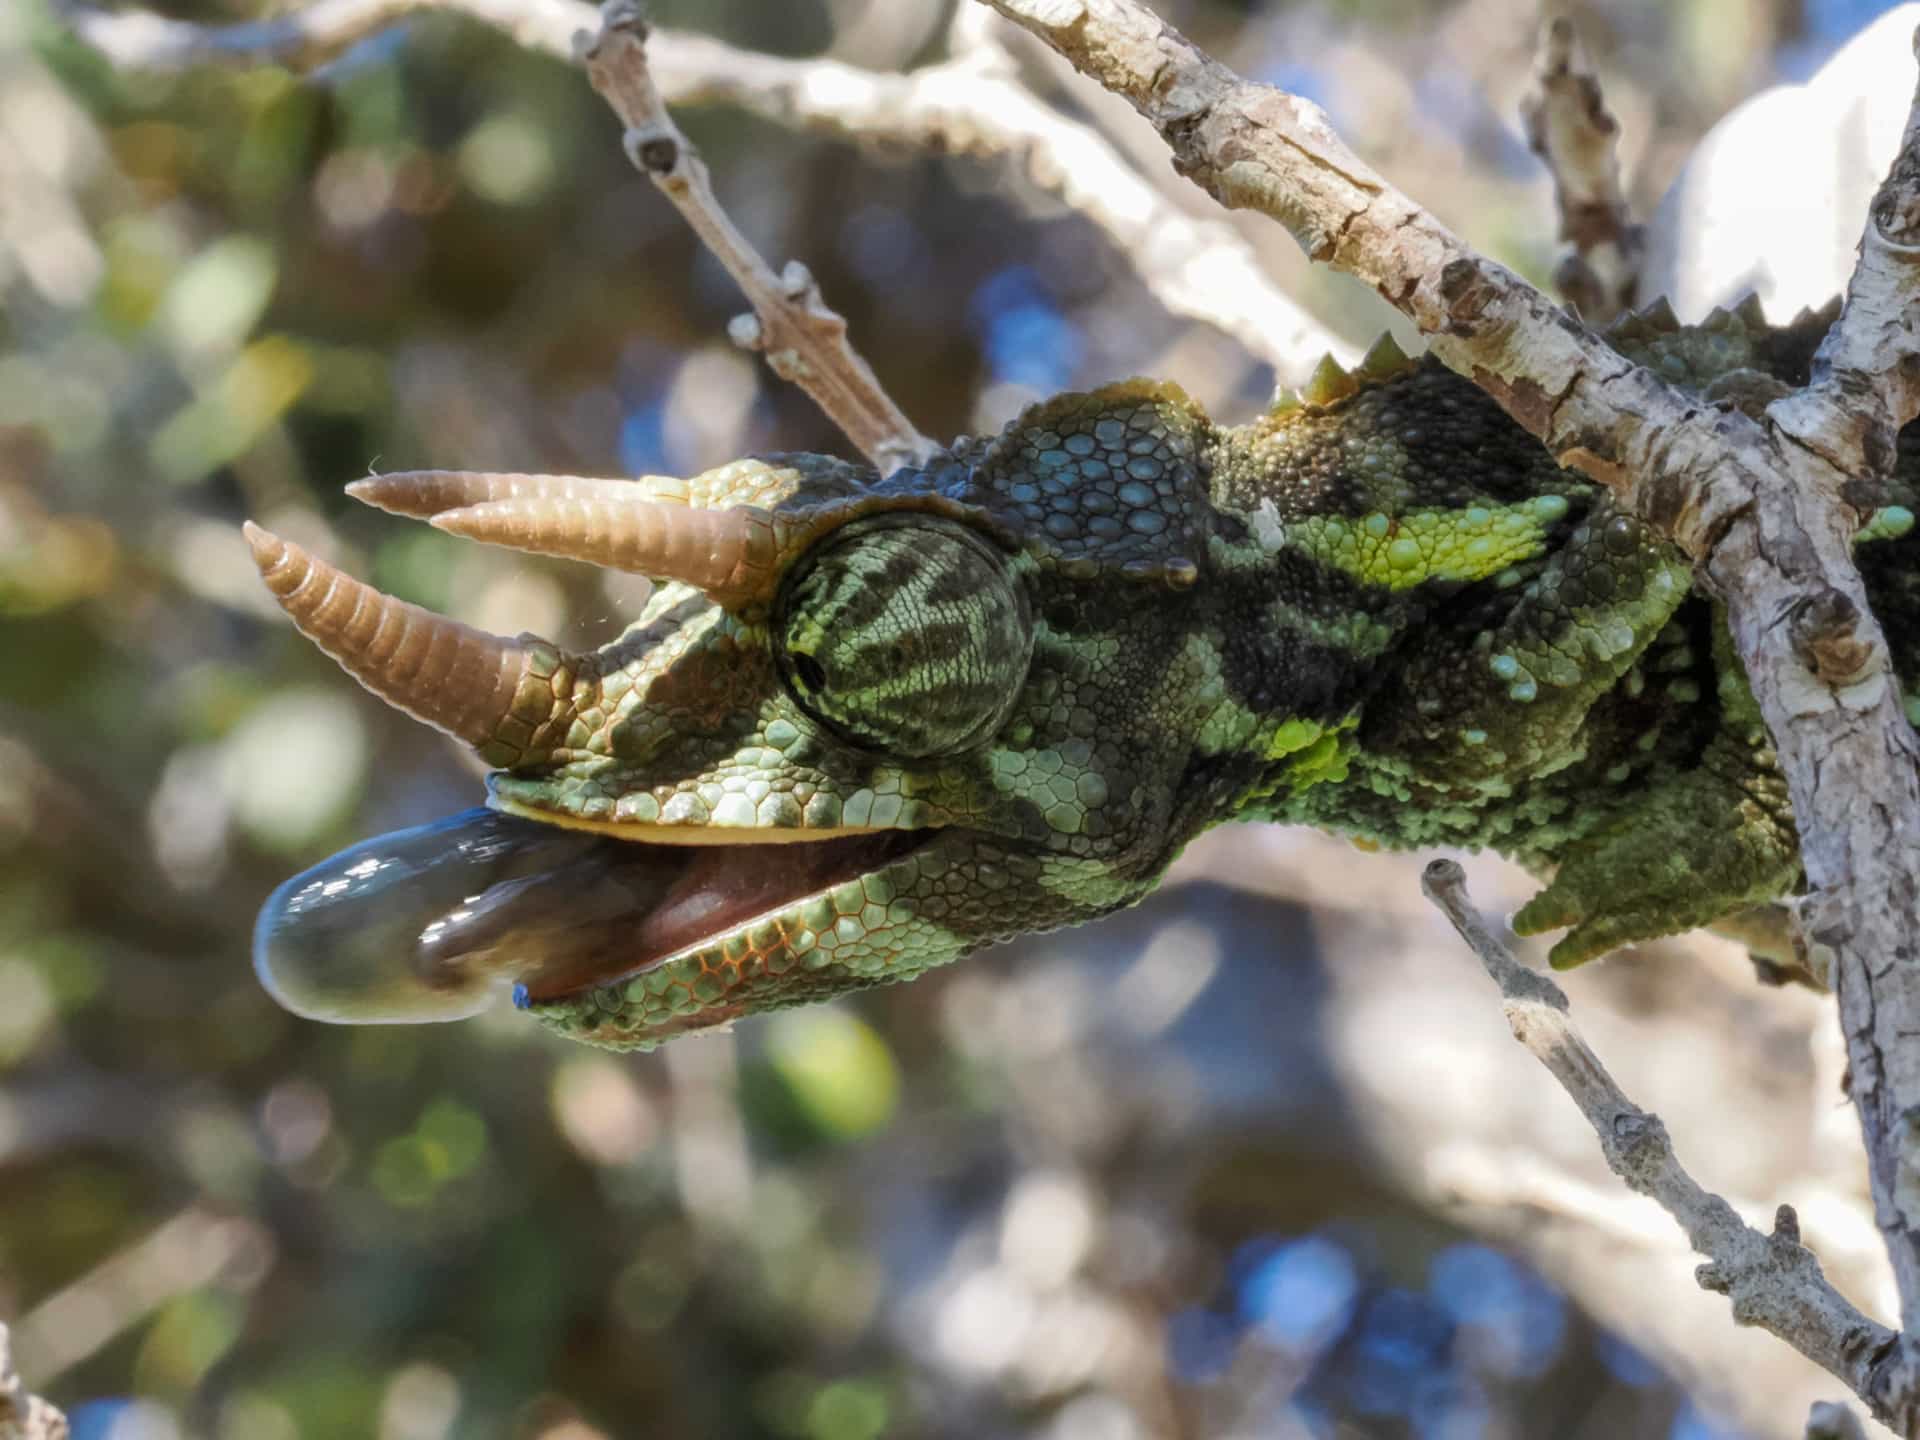 Jackson Chameleon catching lunch